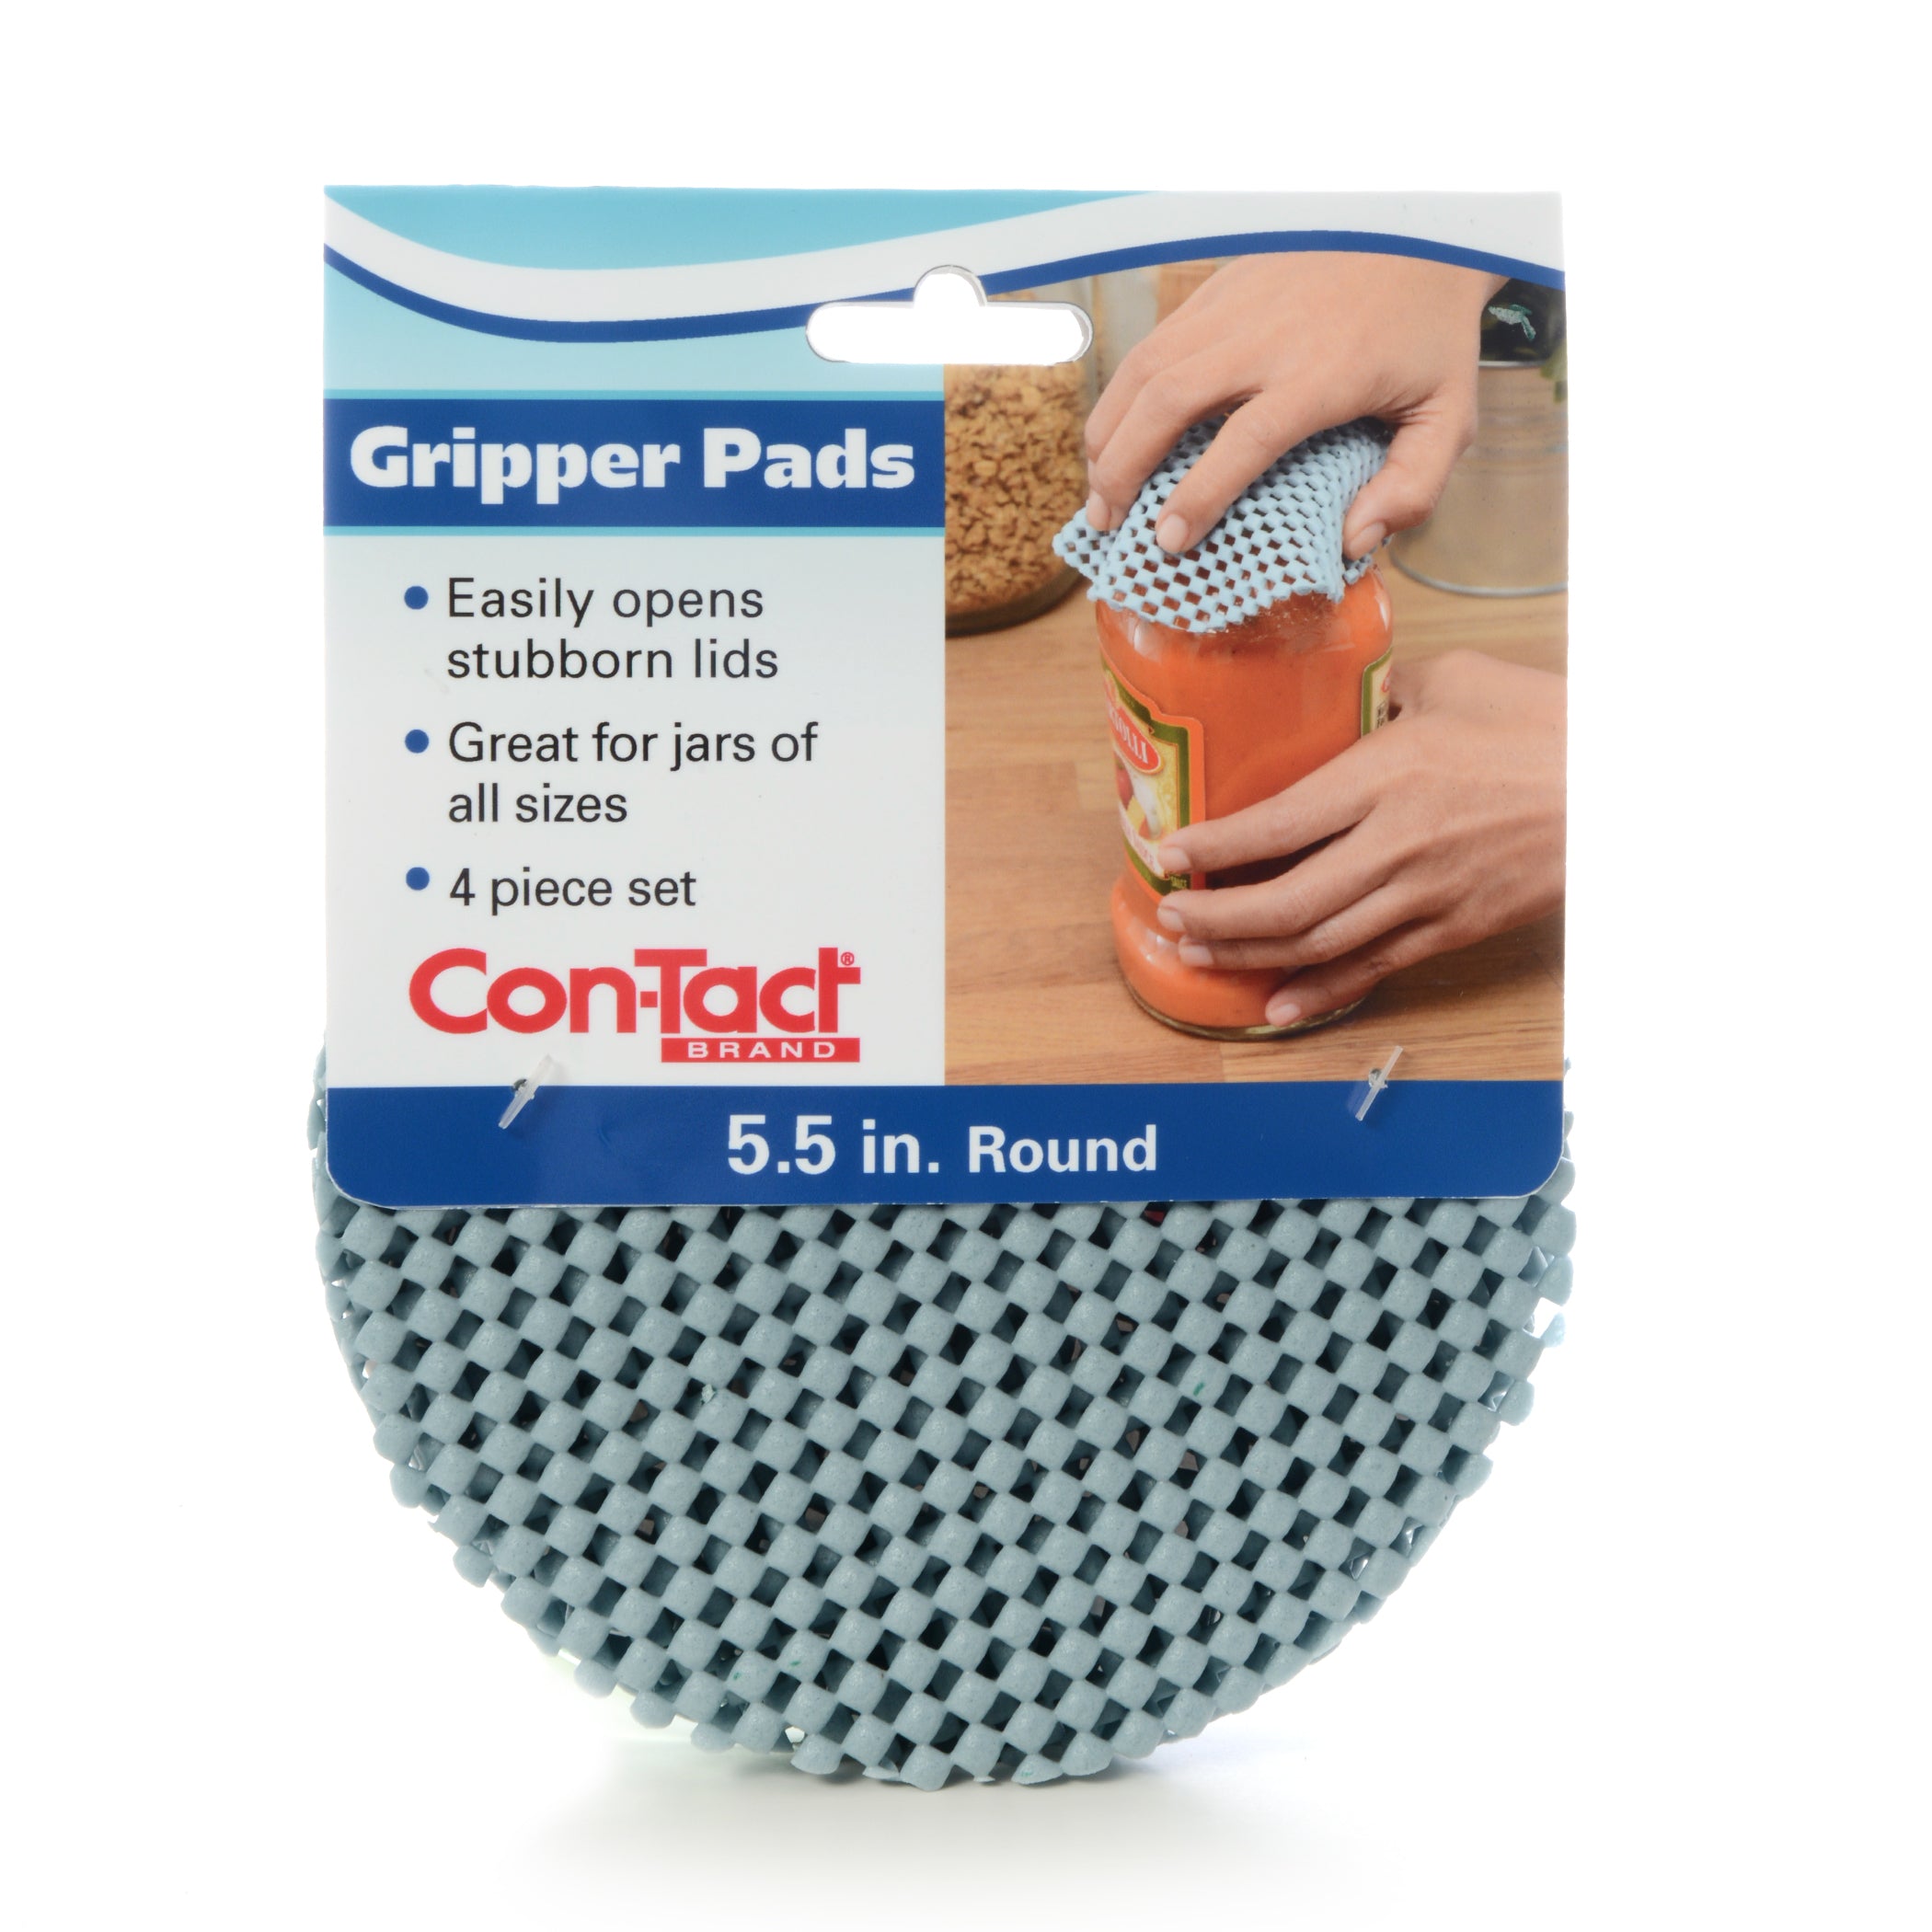 Gripper Pads – Con-Tact Brand